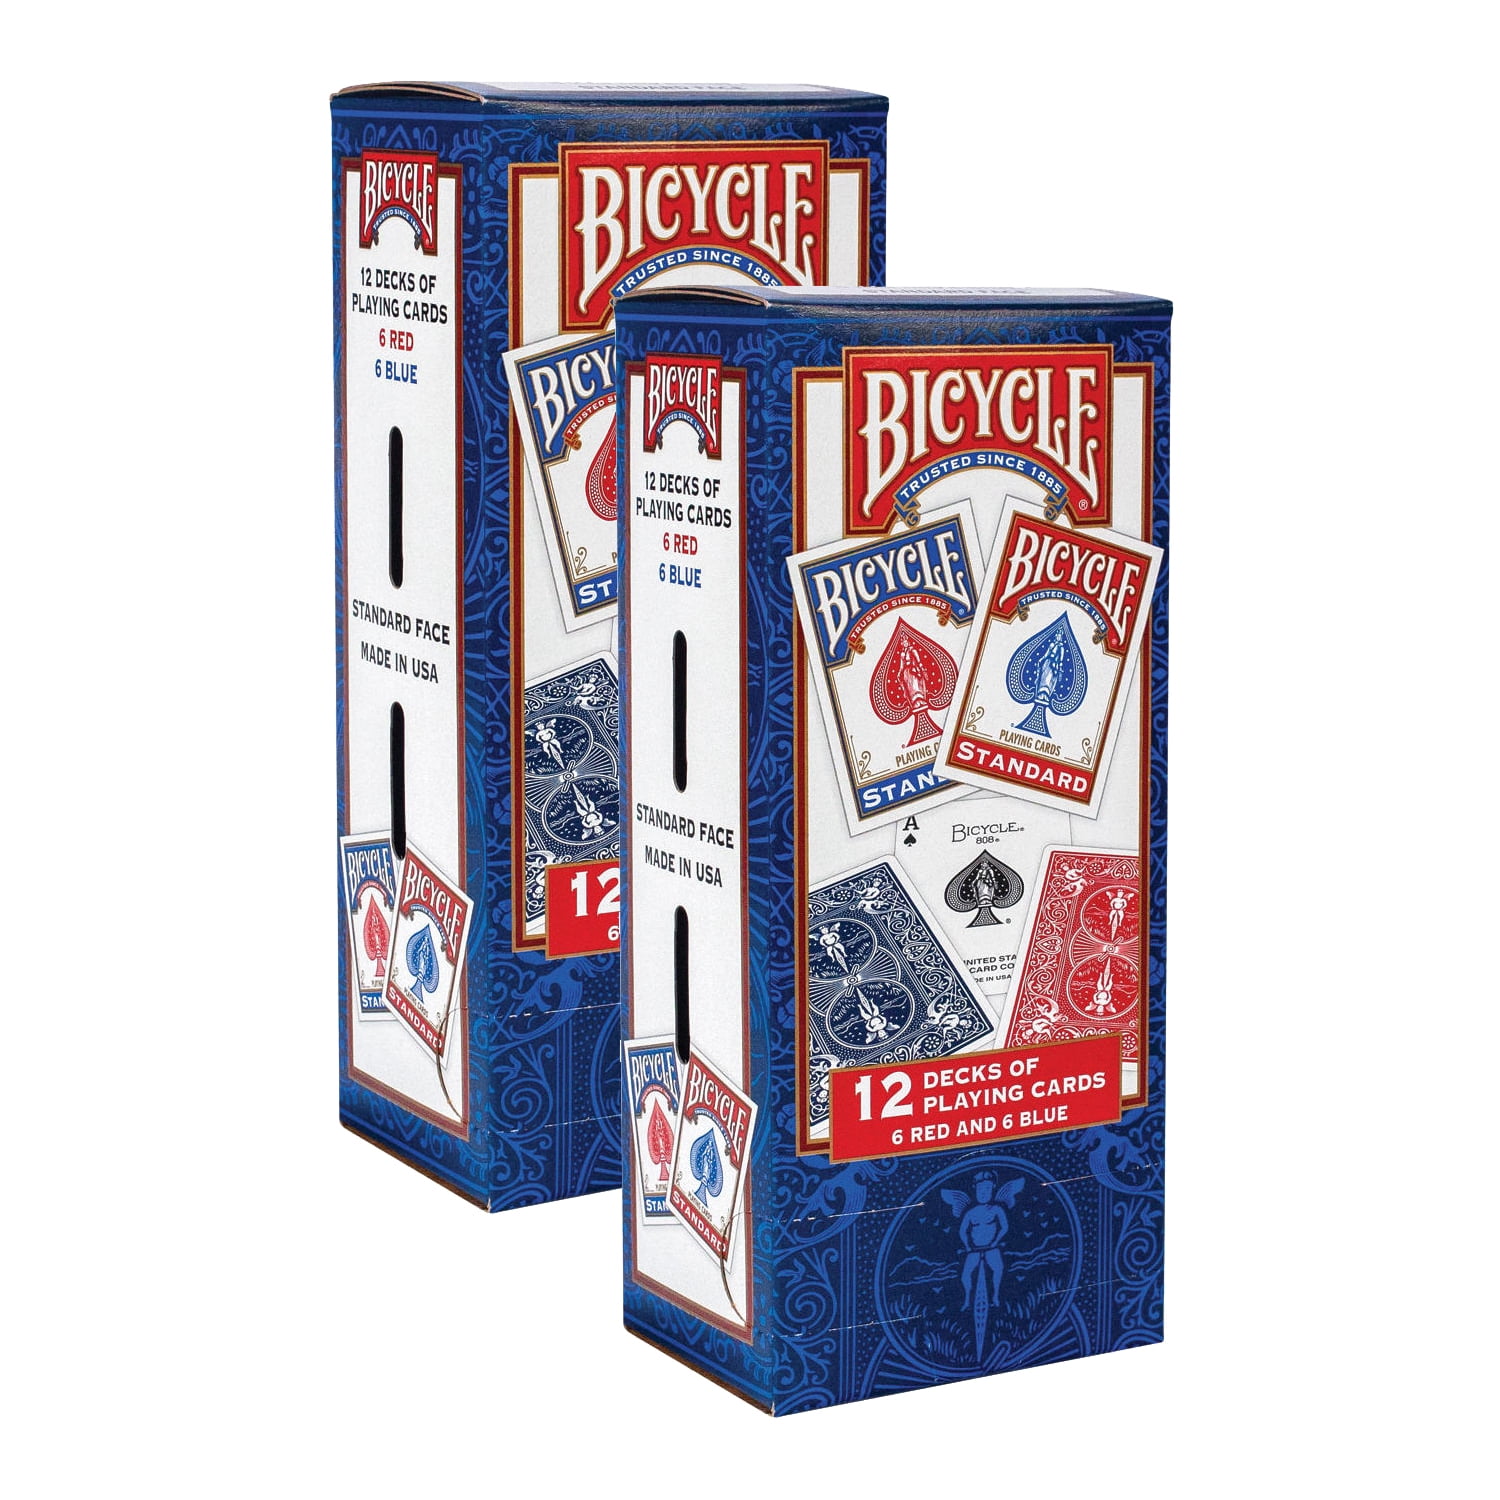 Bicycle Playing Cards 12 Decks Standard Face 6red 6blue for sale online 